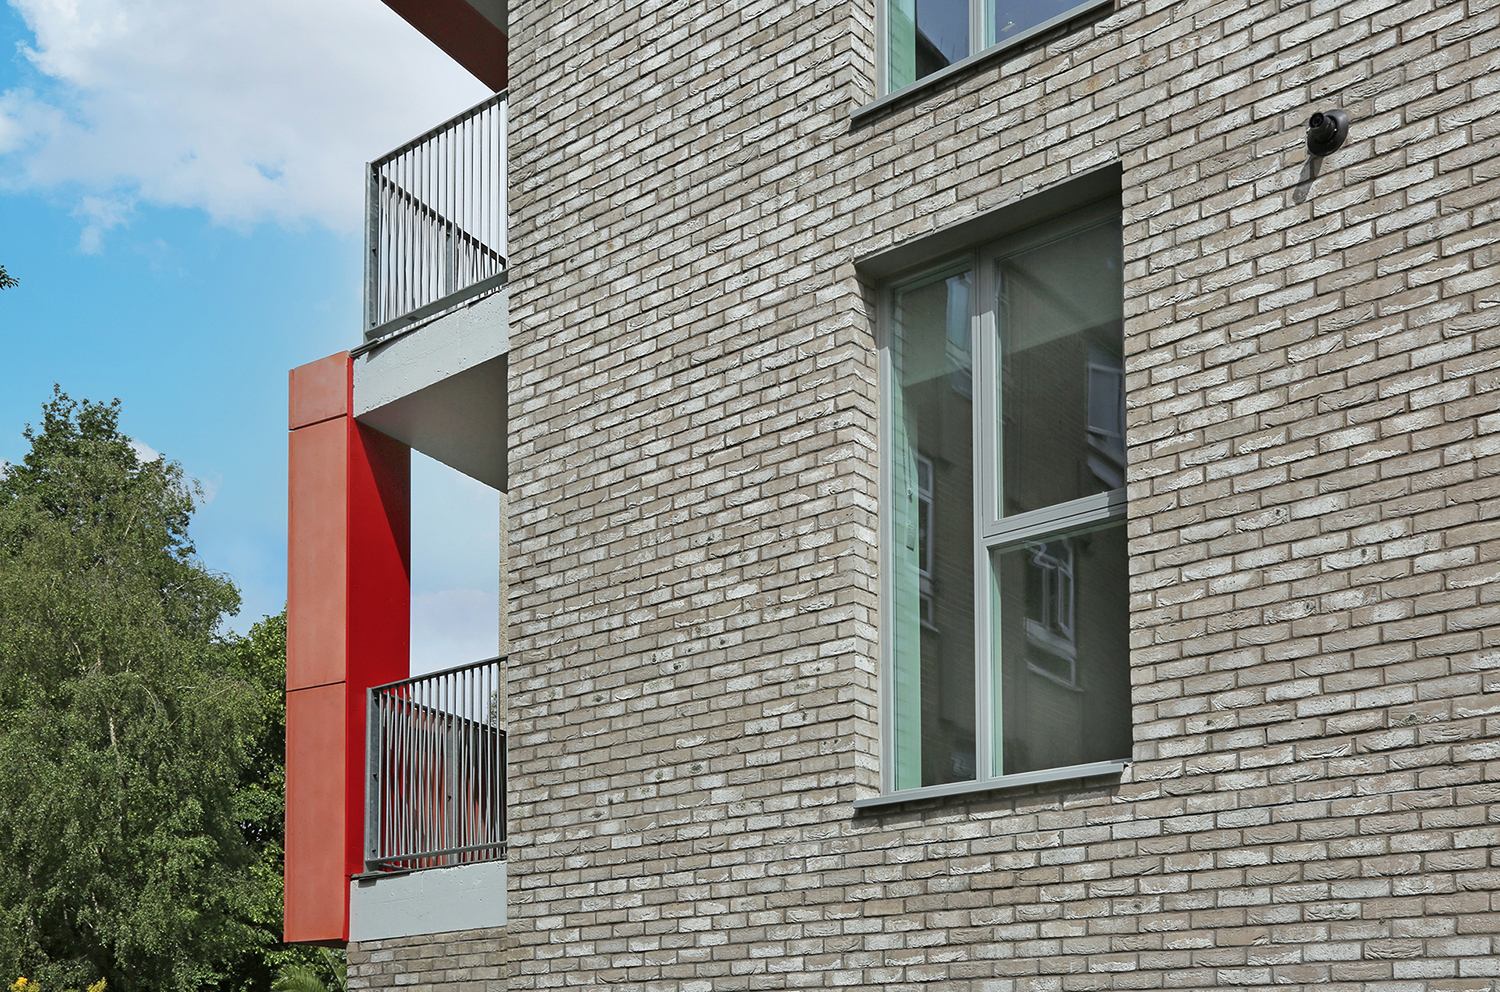 Bell Phillips Architects choose Vandersanden bricks for colour, texture and contrast at Orwell House